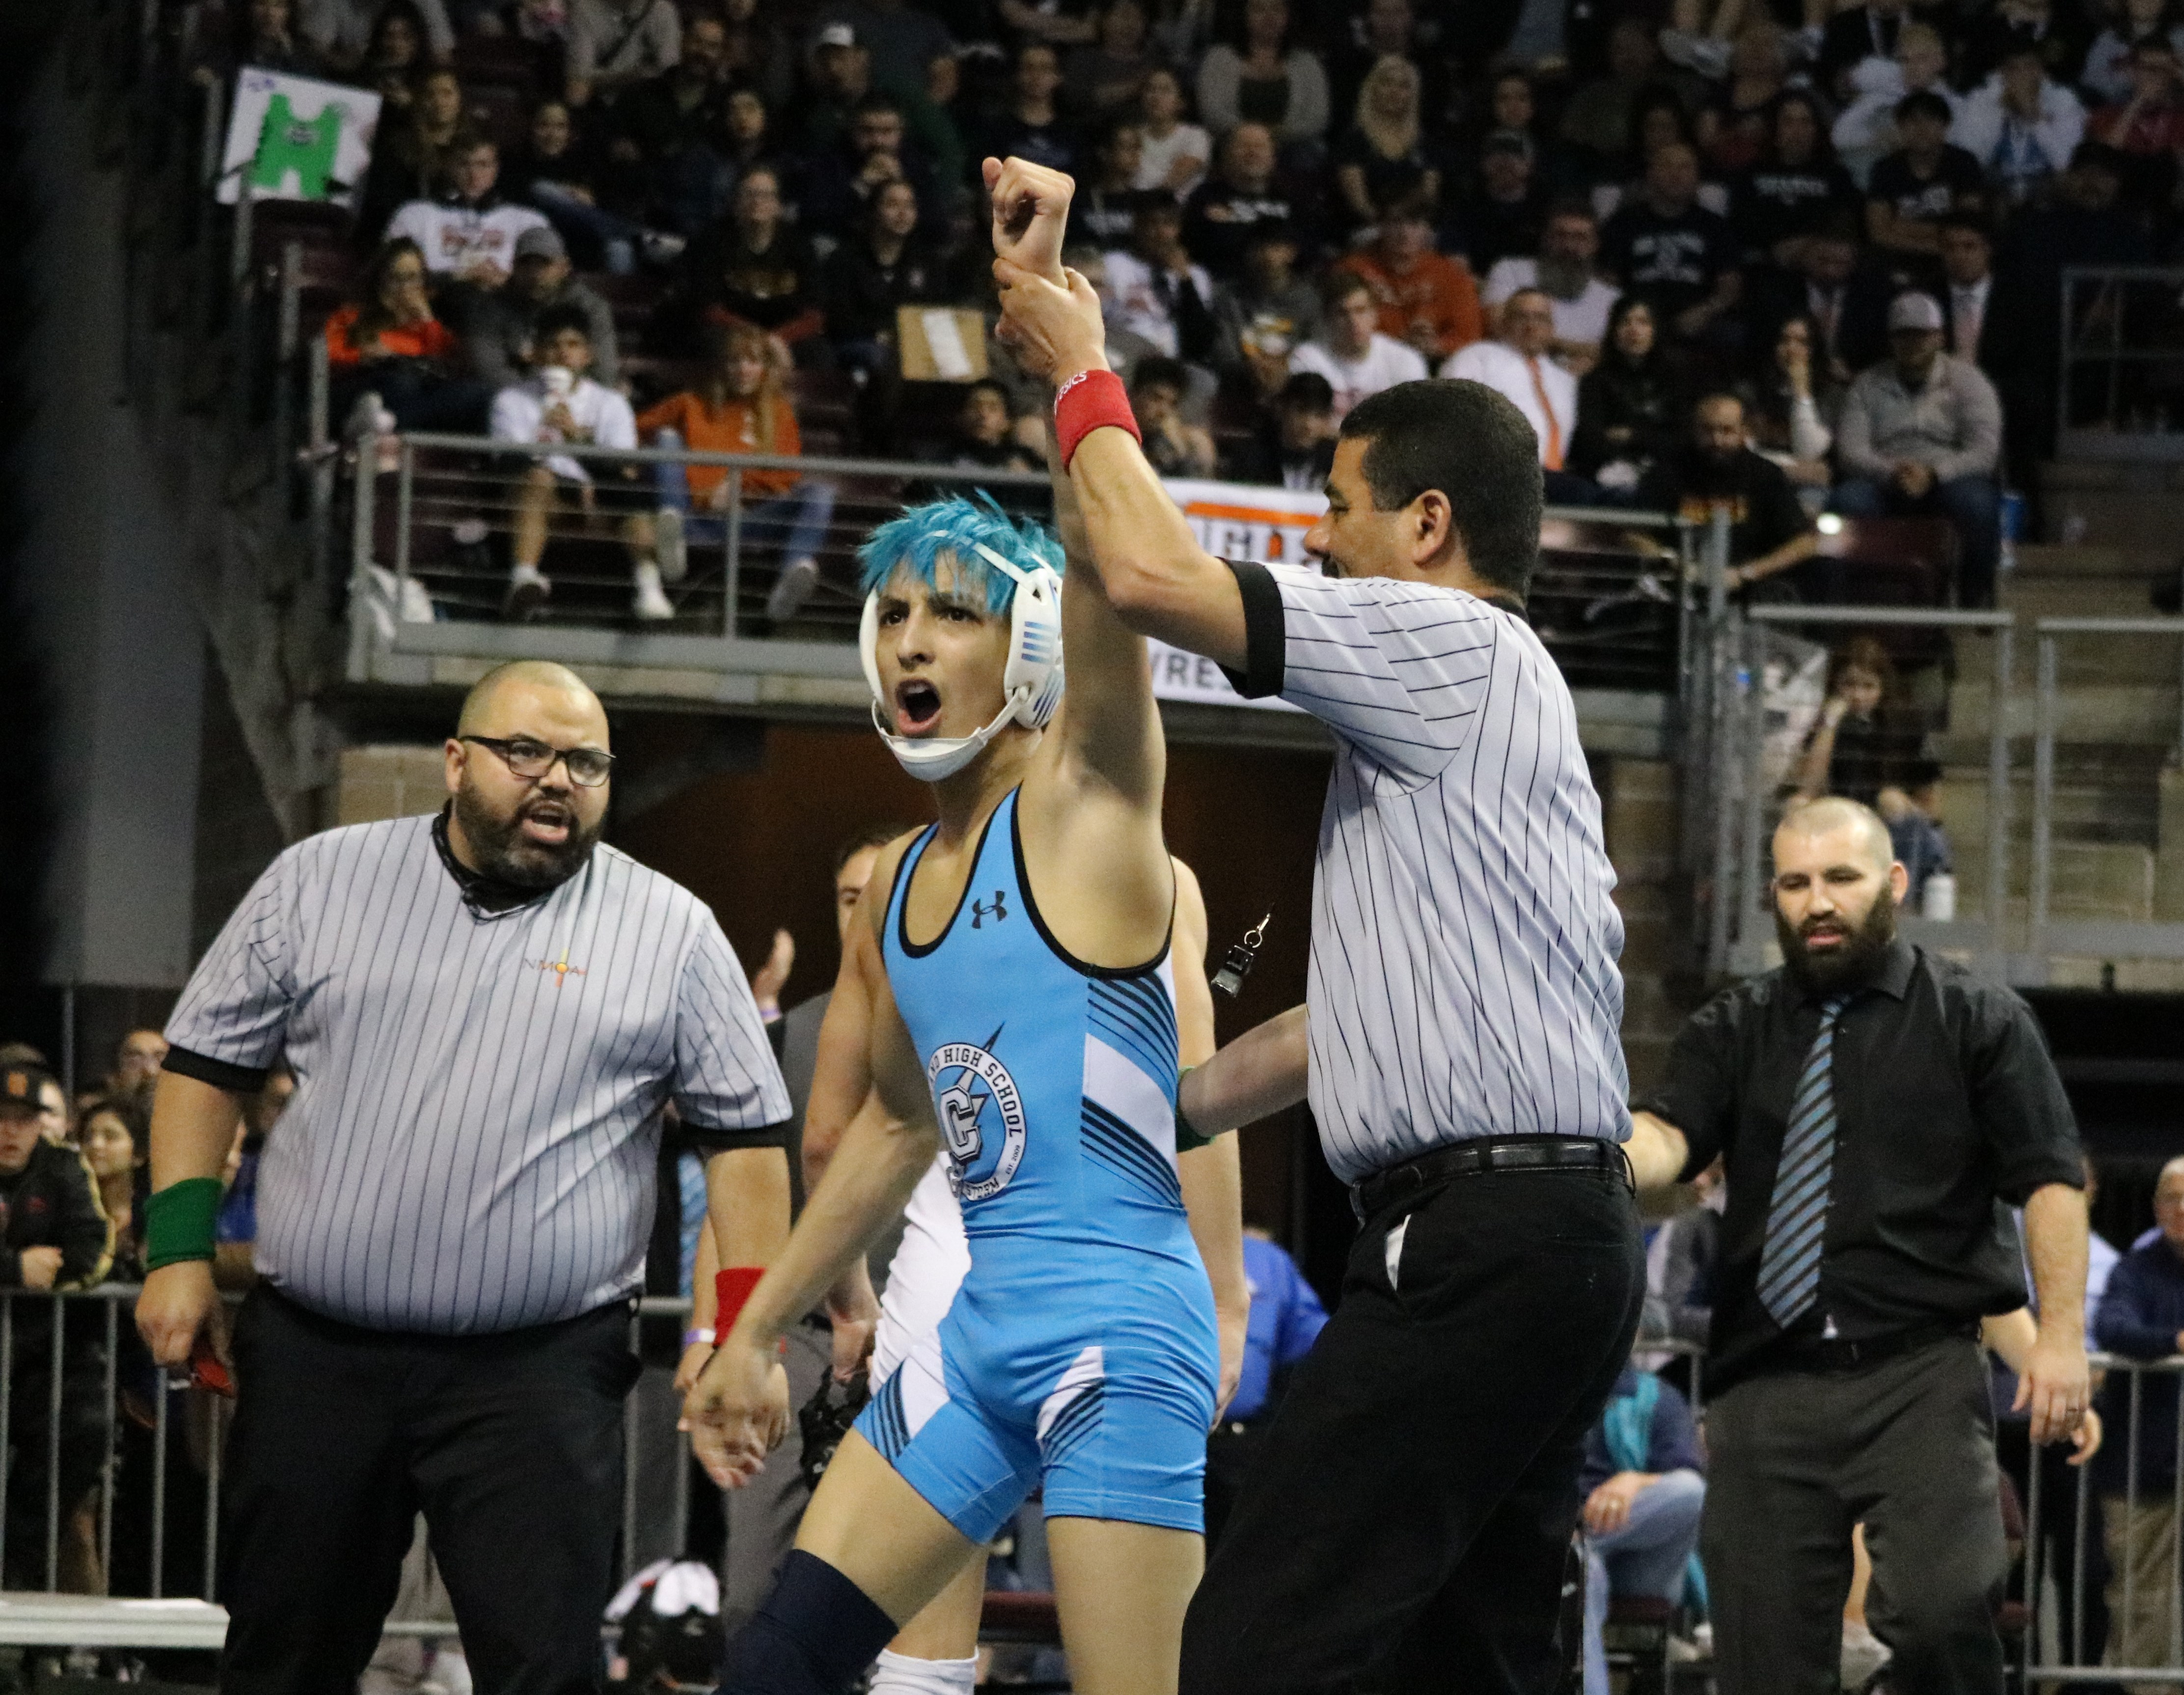 Cleveland wrestler holding hand up in the air with his victory